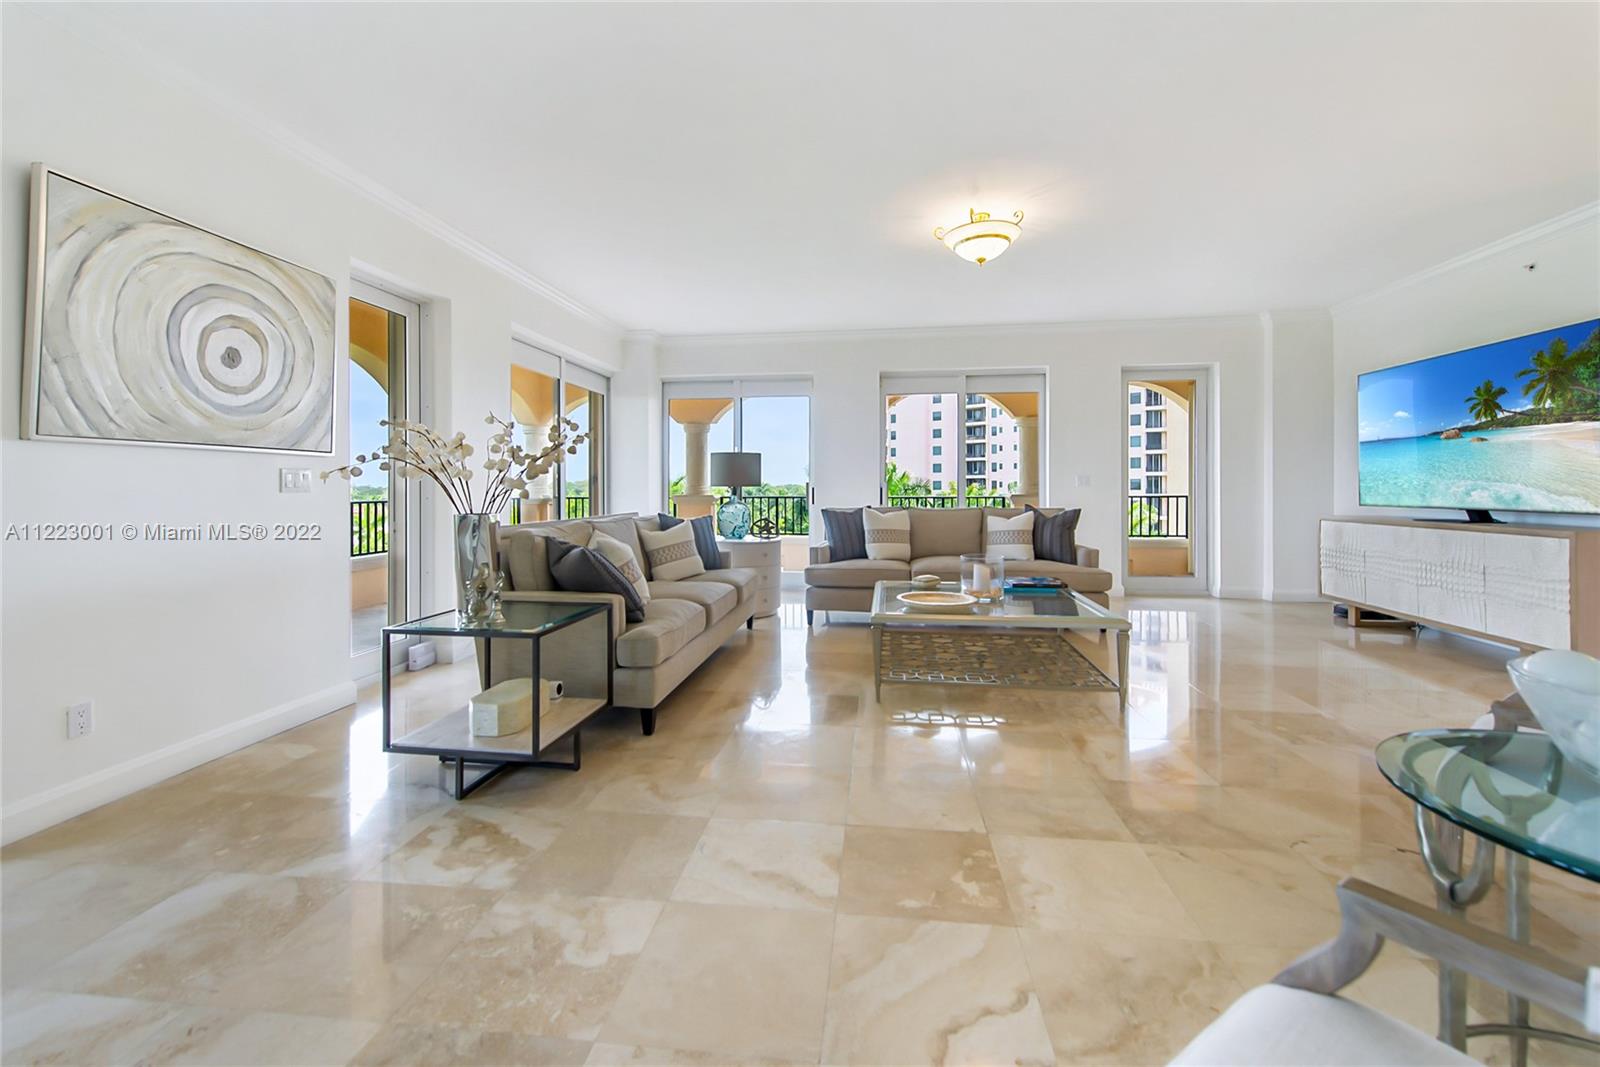 Welcome to Deering Bay! This beautiful 3BD/3.5BA condo in the Padua building is your ticket to the best resort living in Coral Gables. Abundant natural light fills this large, high-floor, corner unit featuring spacious bedrooms & living areas. Kitchen features a breakfast nook w/ Subzero and Thermador appliances. Master suite with sitting area, separate office, walk-in closets & custom built-in cabinets. Marble & wood floors throughout. The large, covered terrace wraps around the unit and provides sweeping views from the west to the northeast allowing you to enjoy sparkling sunsets and the Downtown Miami skyline. 2 garage parking spaces + golf cart space + A/C storage unit. Guard-gated grounds, secure building with 2 units per floor. Separate Golf Club & Marina memberships available.